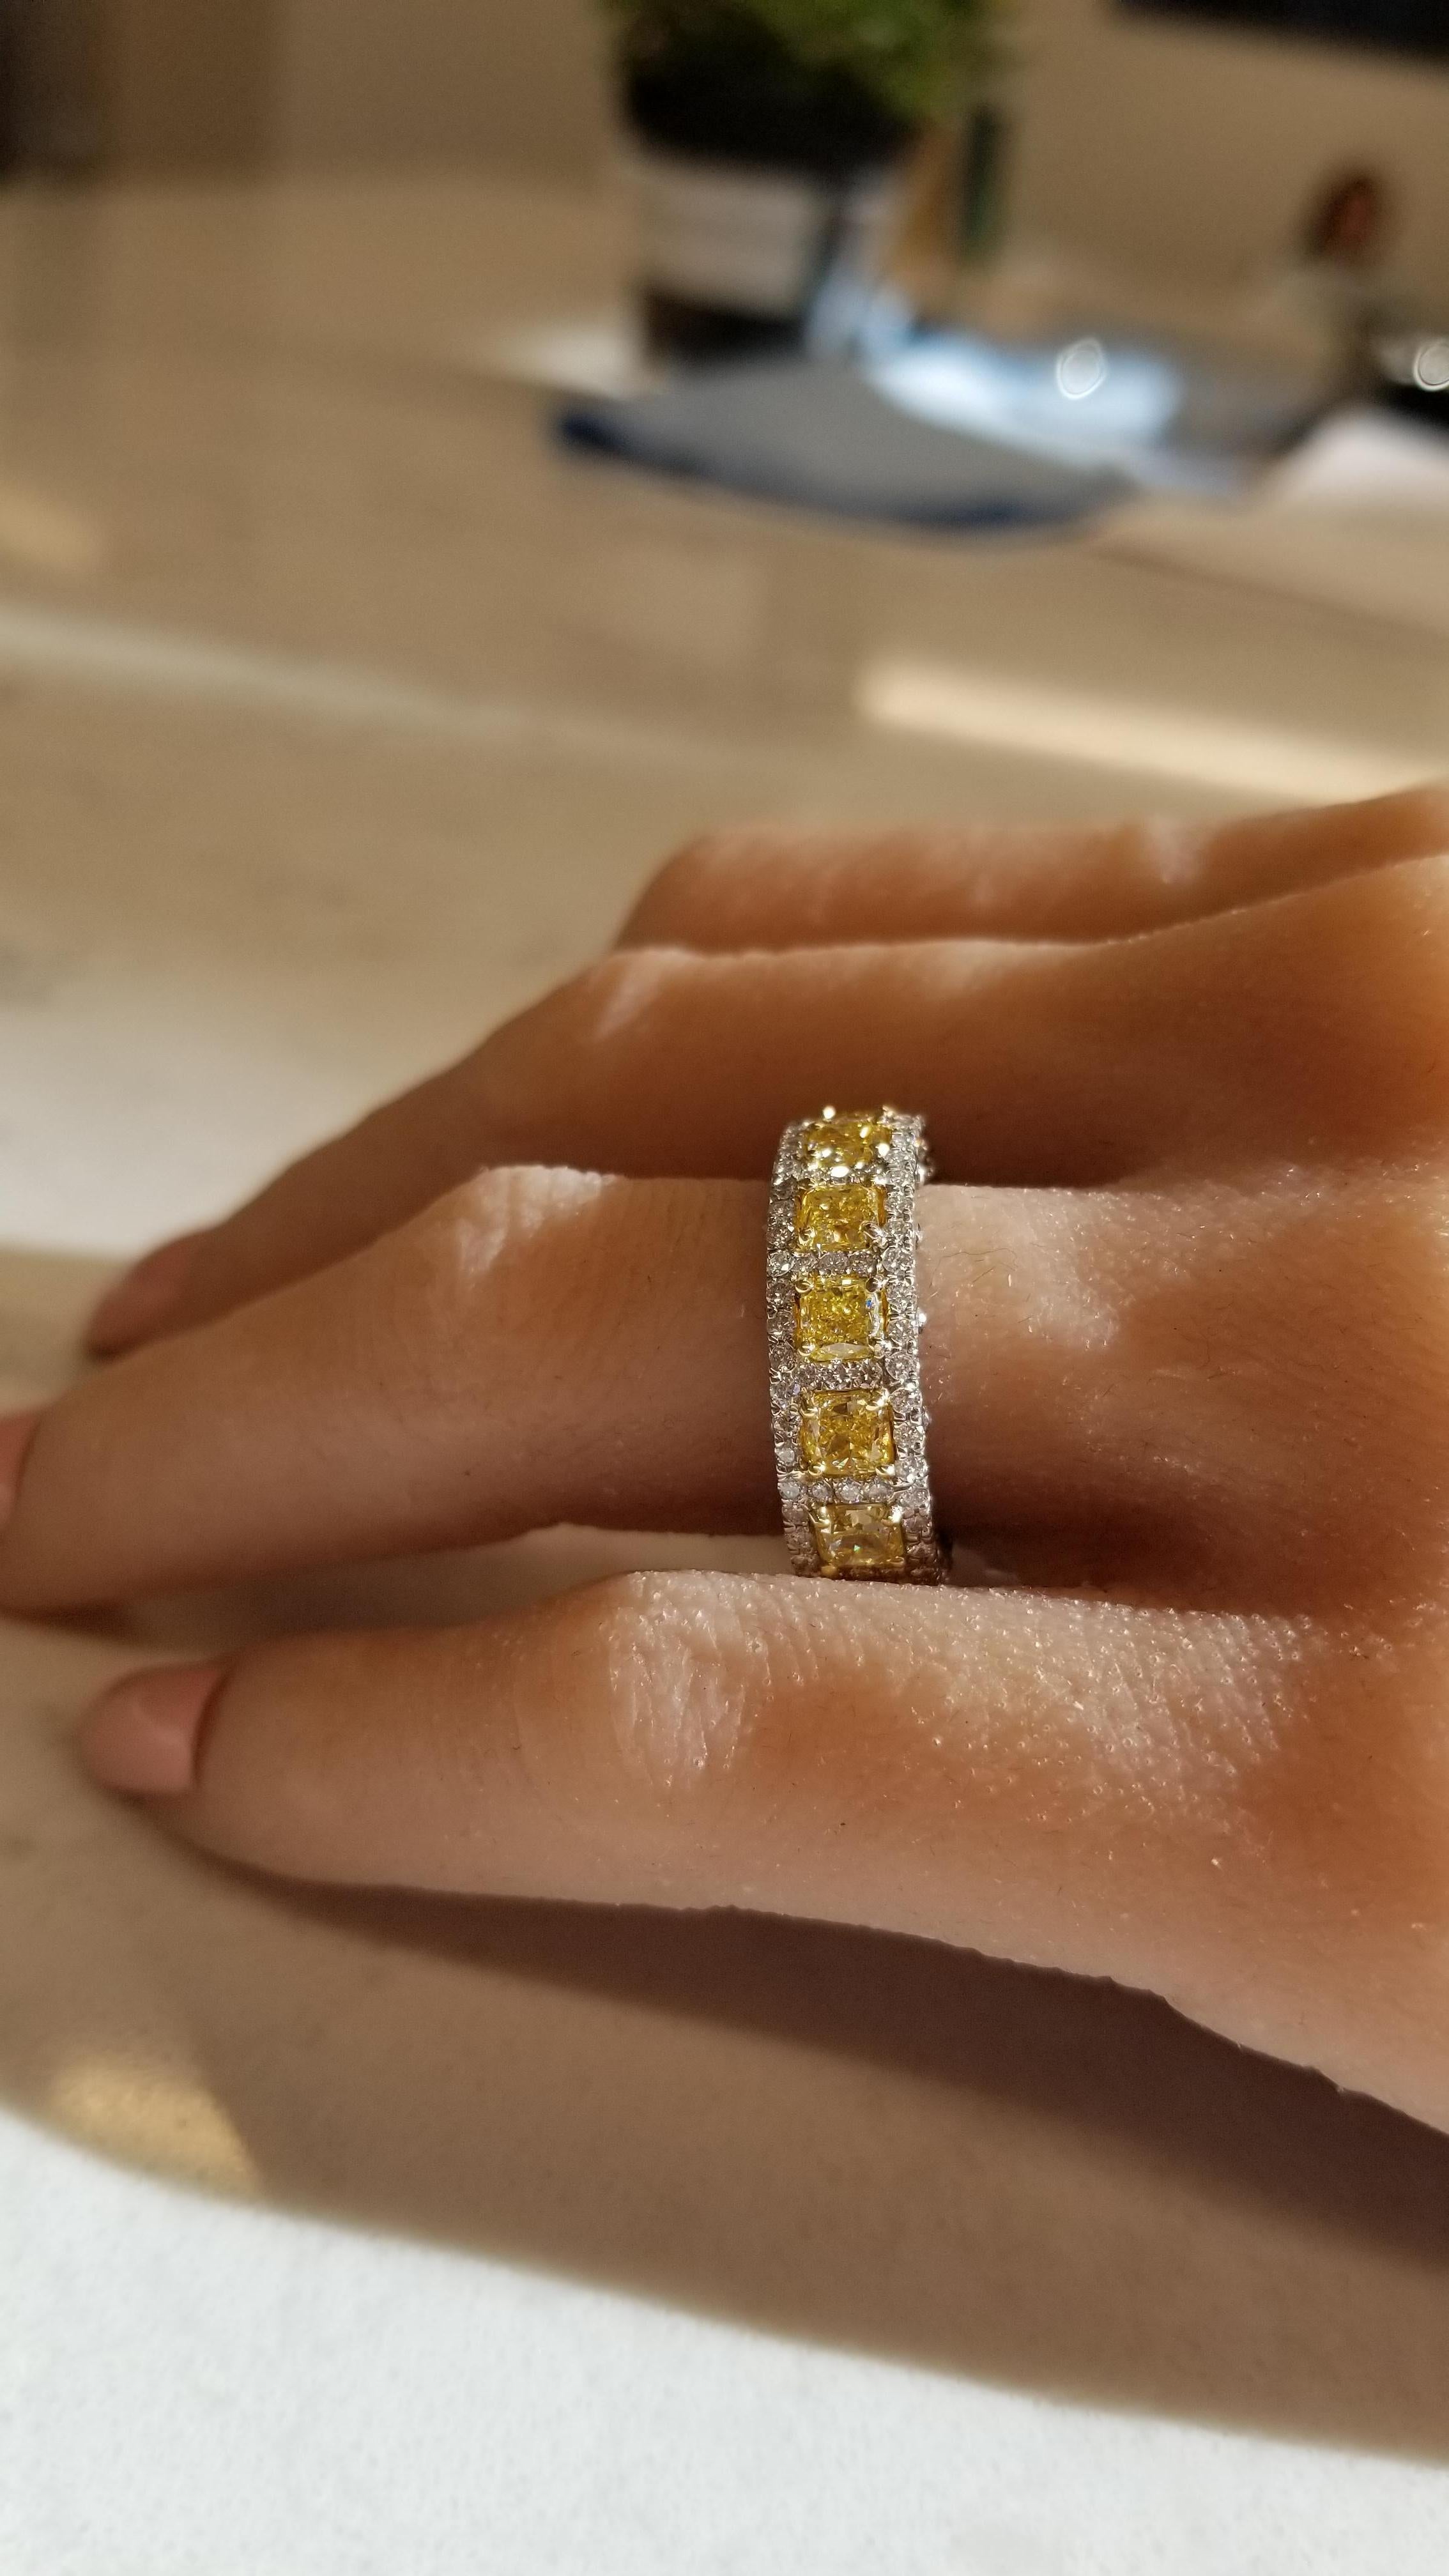 A total of 14 cushion cut natural fancy yellow diamonds are prong set all the way around the band totaling 5.10 carats and have VVS-VS clarity. The color of the cushion cuts are lemon yellow. Each of these natural fancy yellow diamonds is framed by